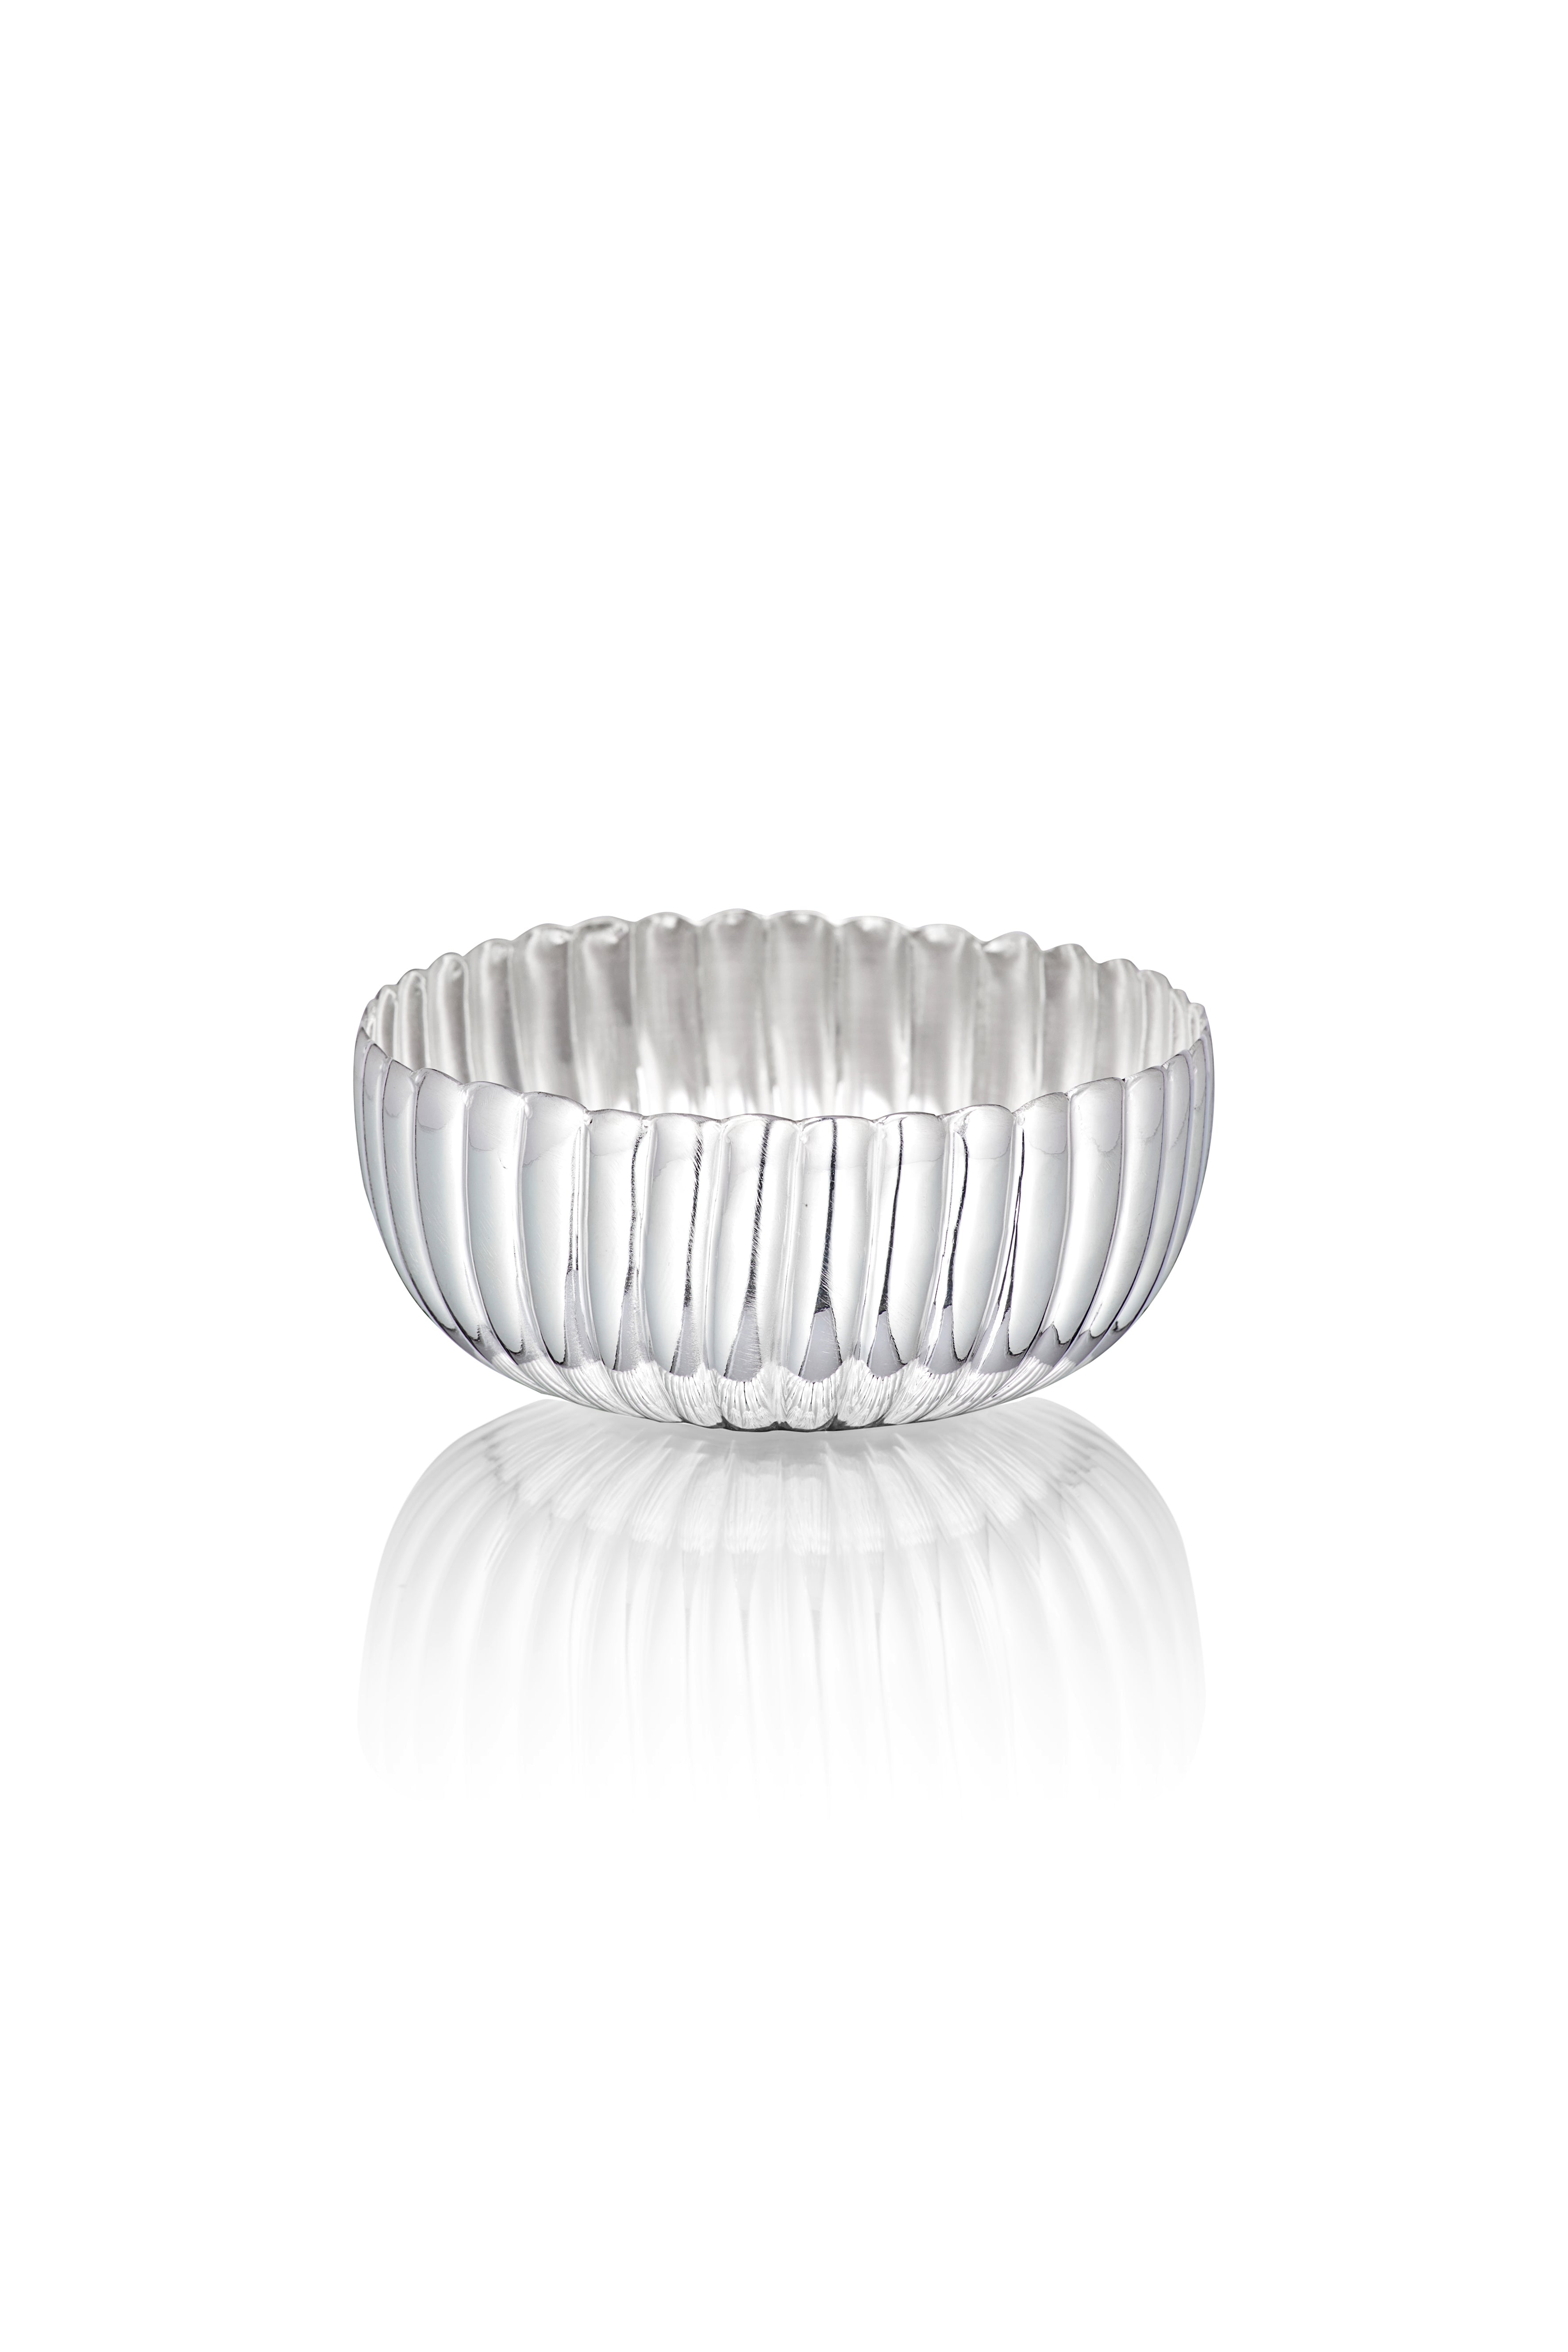 Homm Days Silver-Plated Appetizer